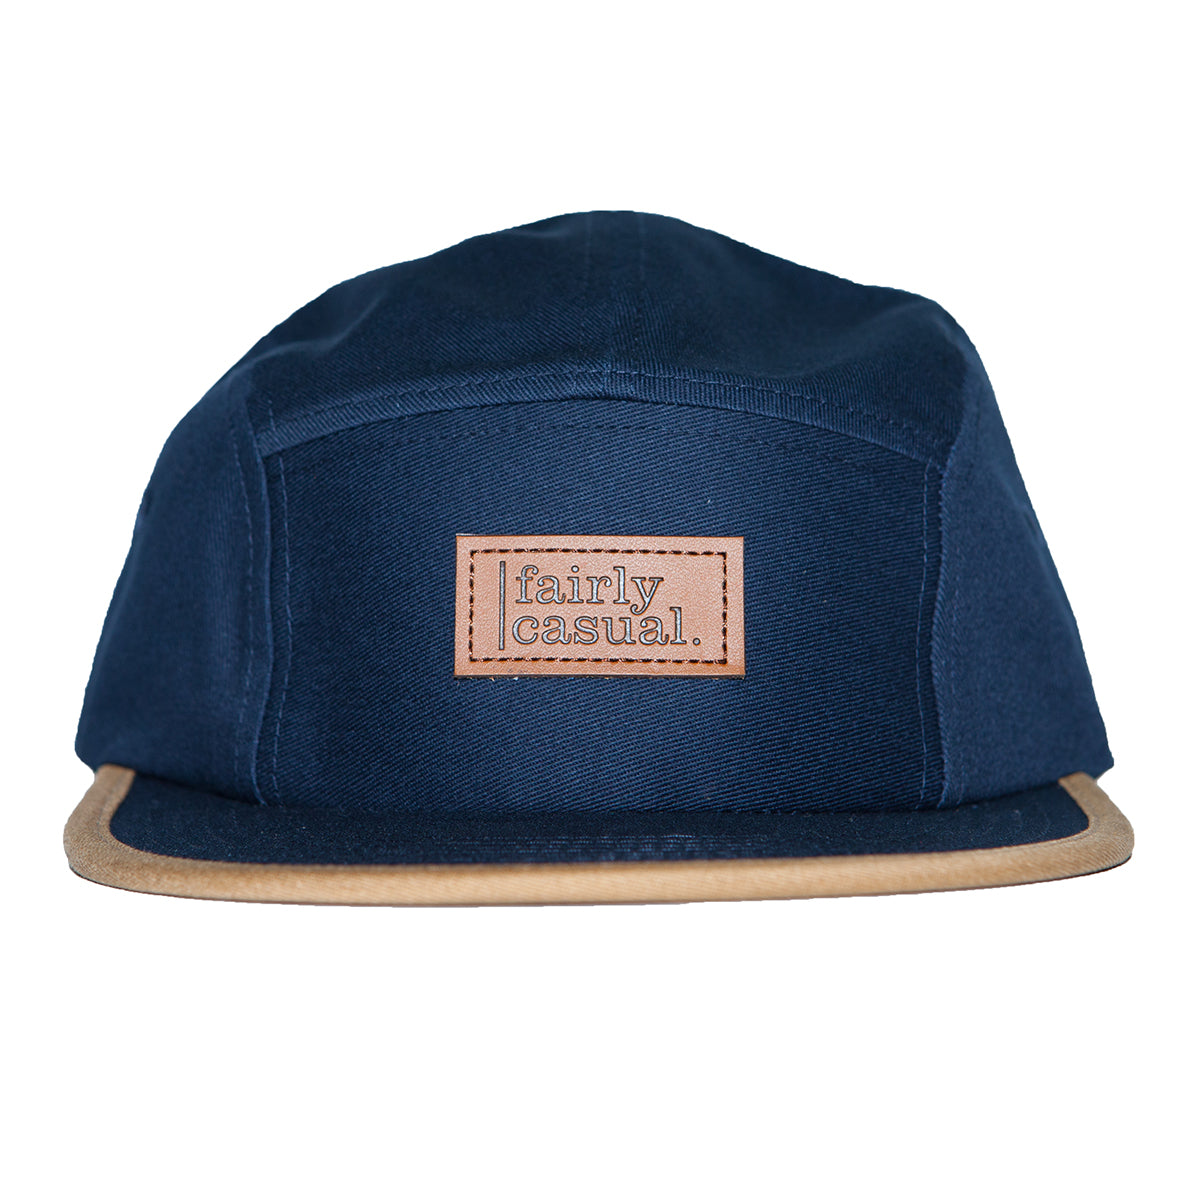 Camper 5-Panel - Fairly Casual - Hats